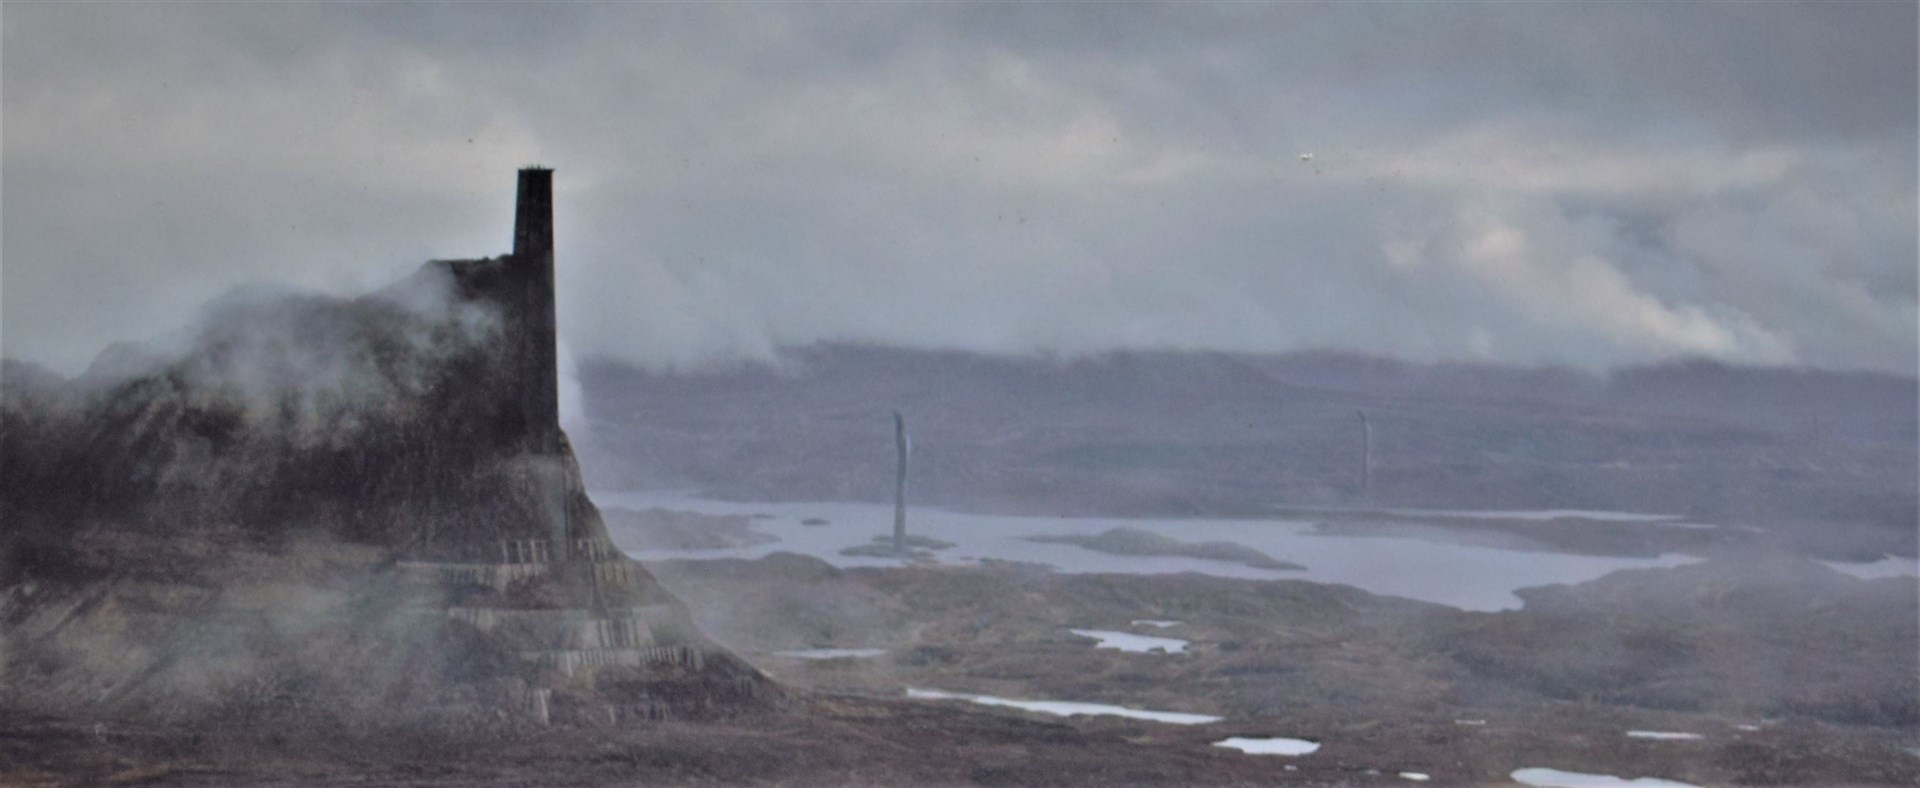 Suilven, pictured ont he left of shot, was transformed into a base and temple for the episode, but is still clearly recognisable. ©2023 Lucasfilm Ltd. & TM. All Rights Reserved.